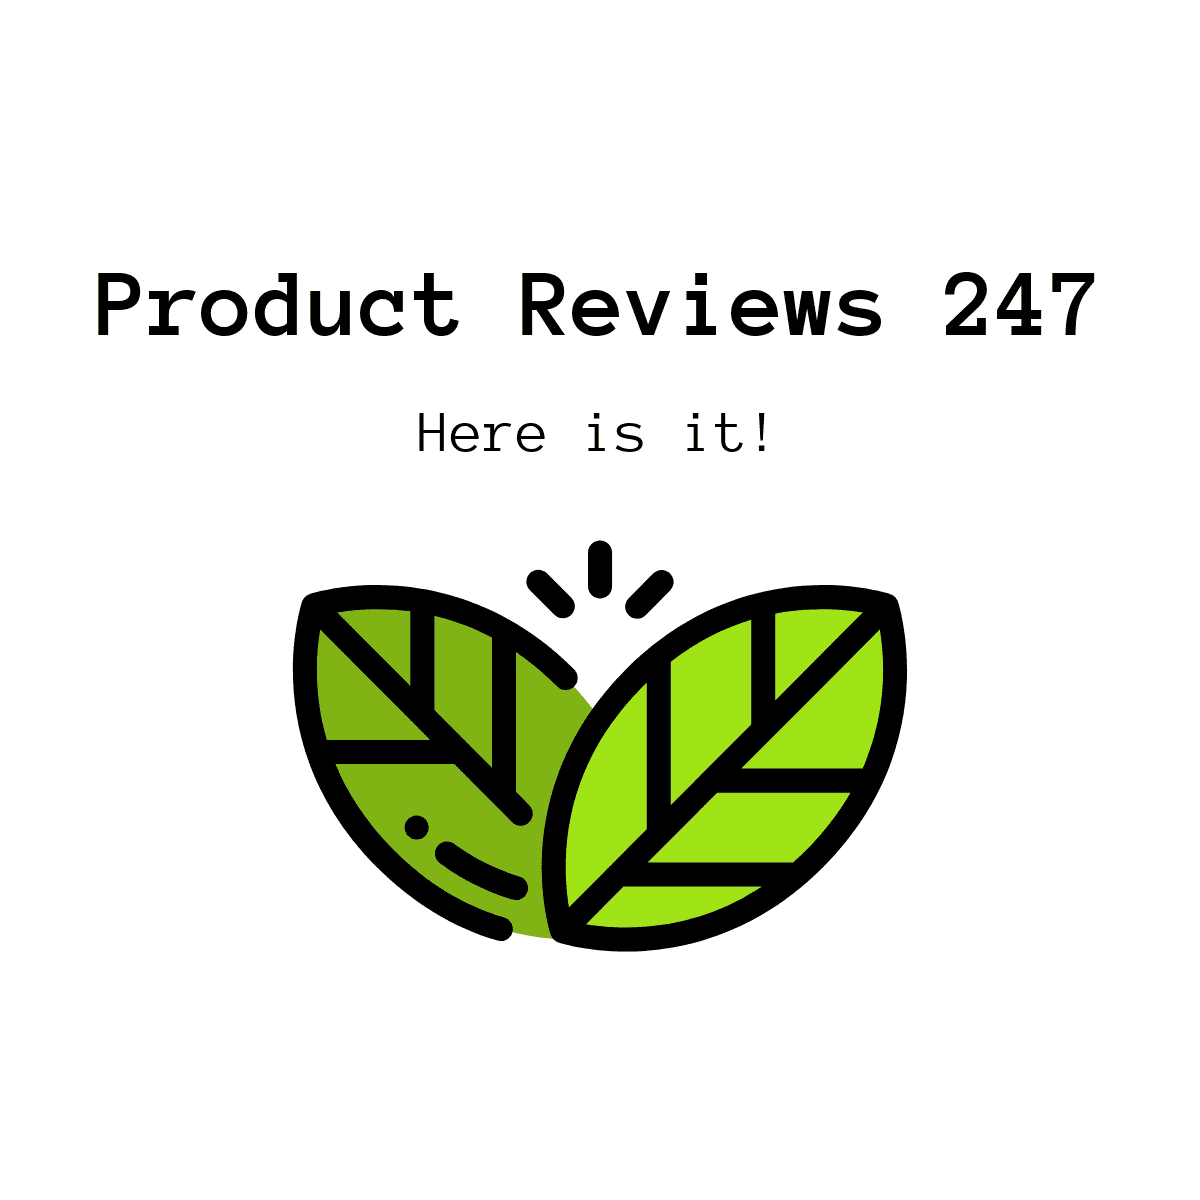 Product reviews 247